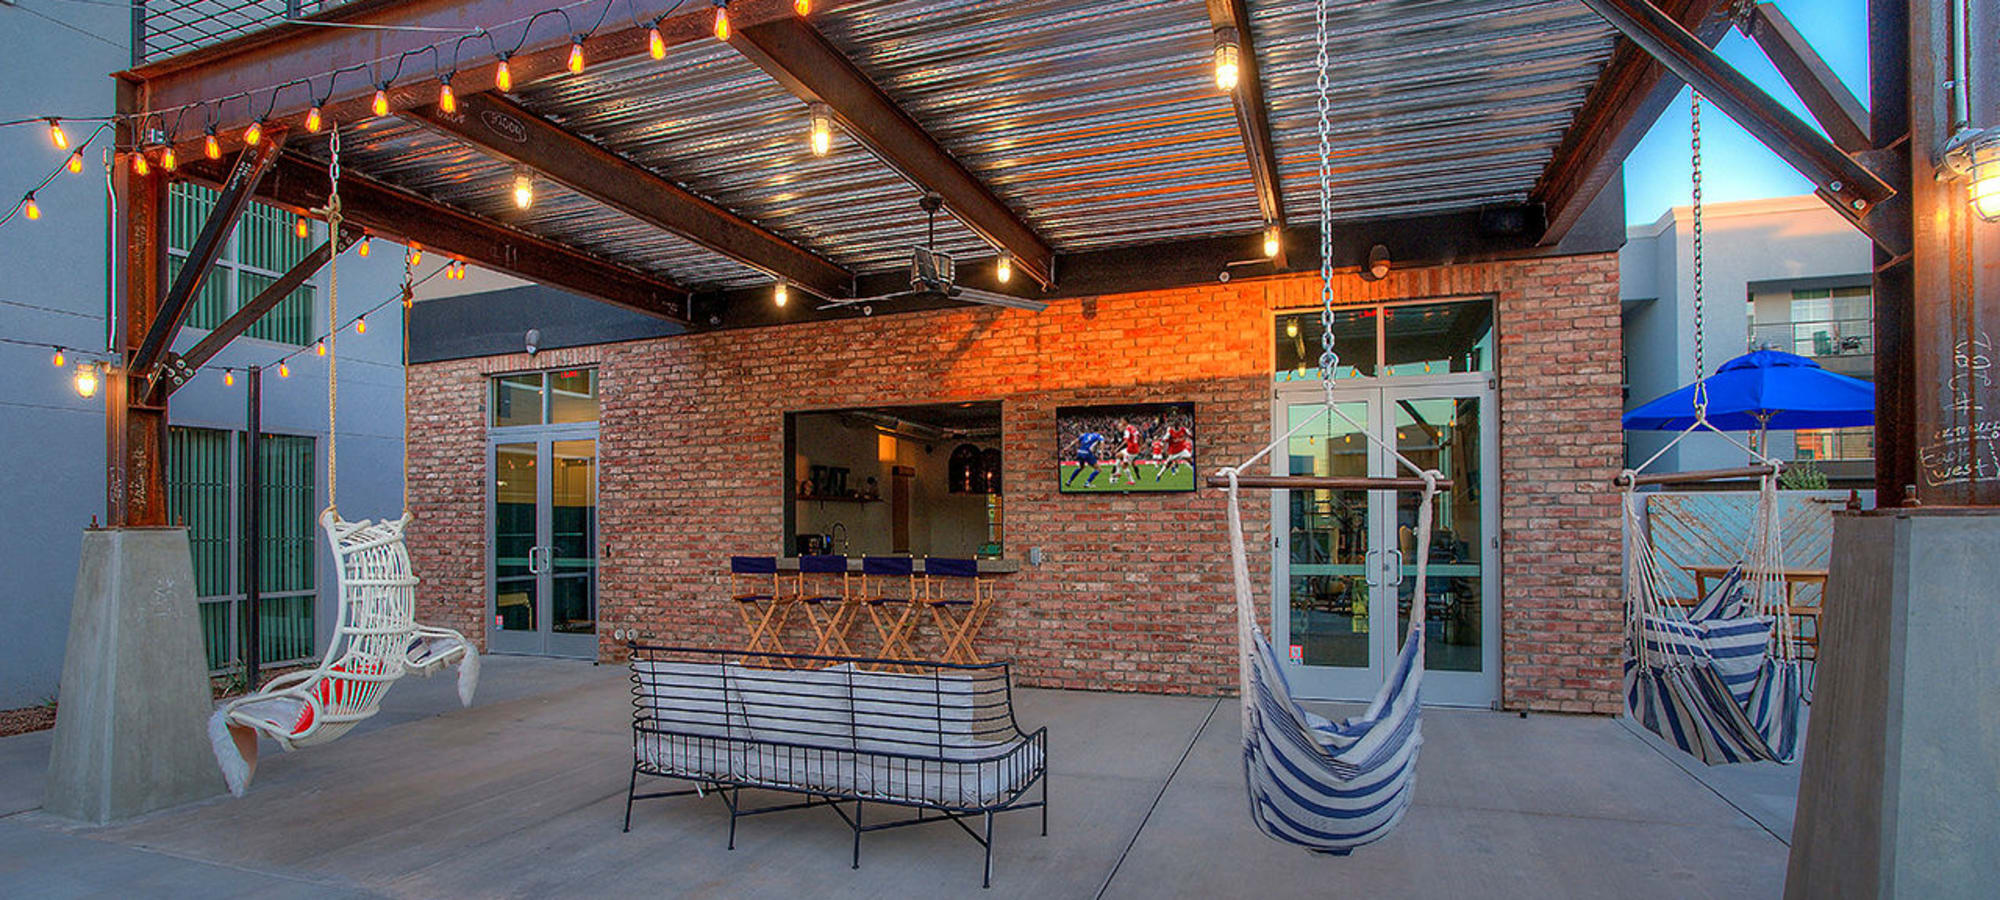 Hammocks and comfortable seating near the barbecue area at District Lofts in Gilbert, Arizona